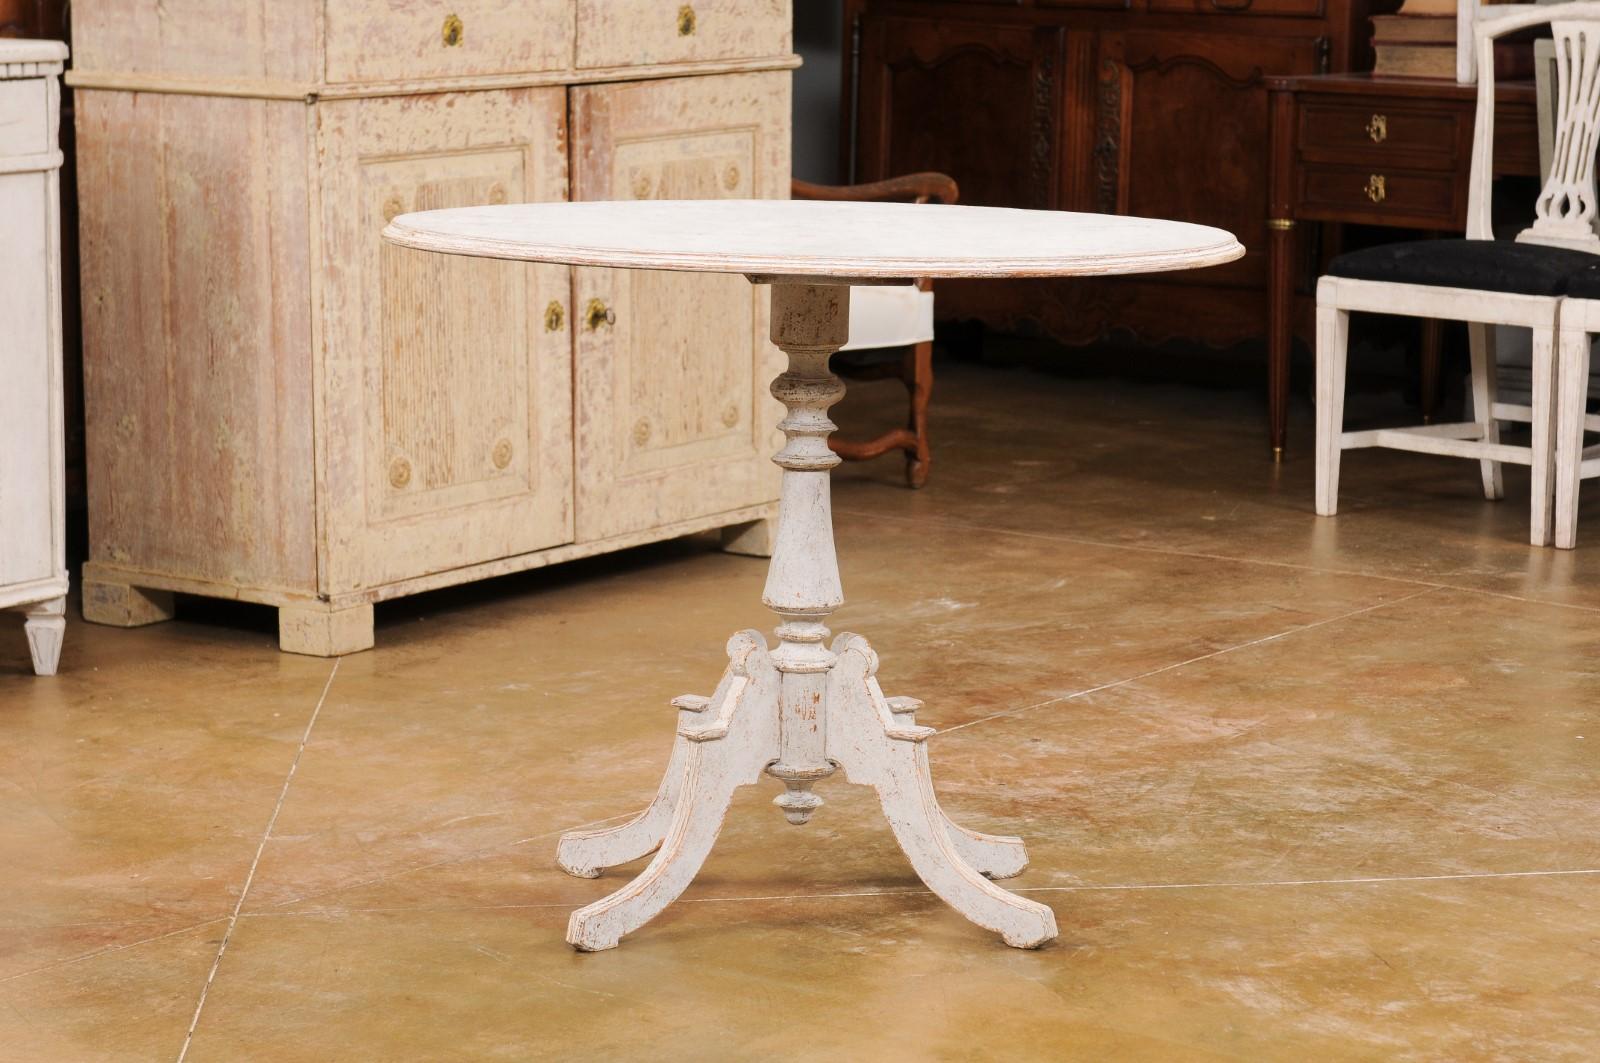 Swedish 1880s Painted Wood Guéridon Table with Oval Top and Pedestal Base For Sale 7